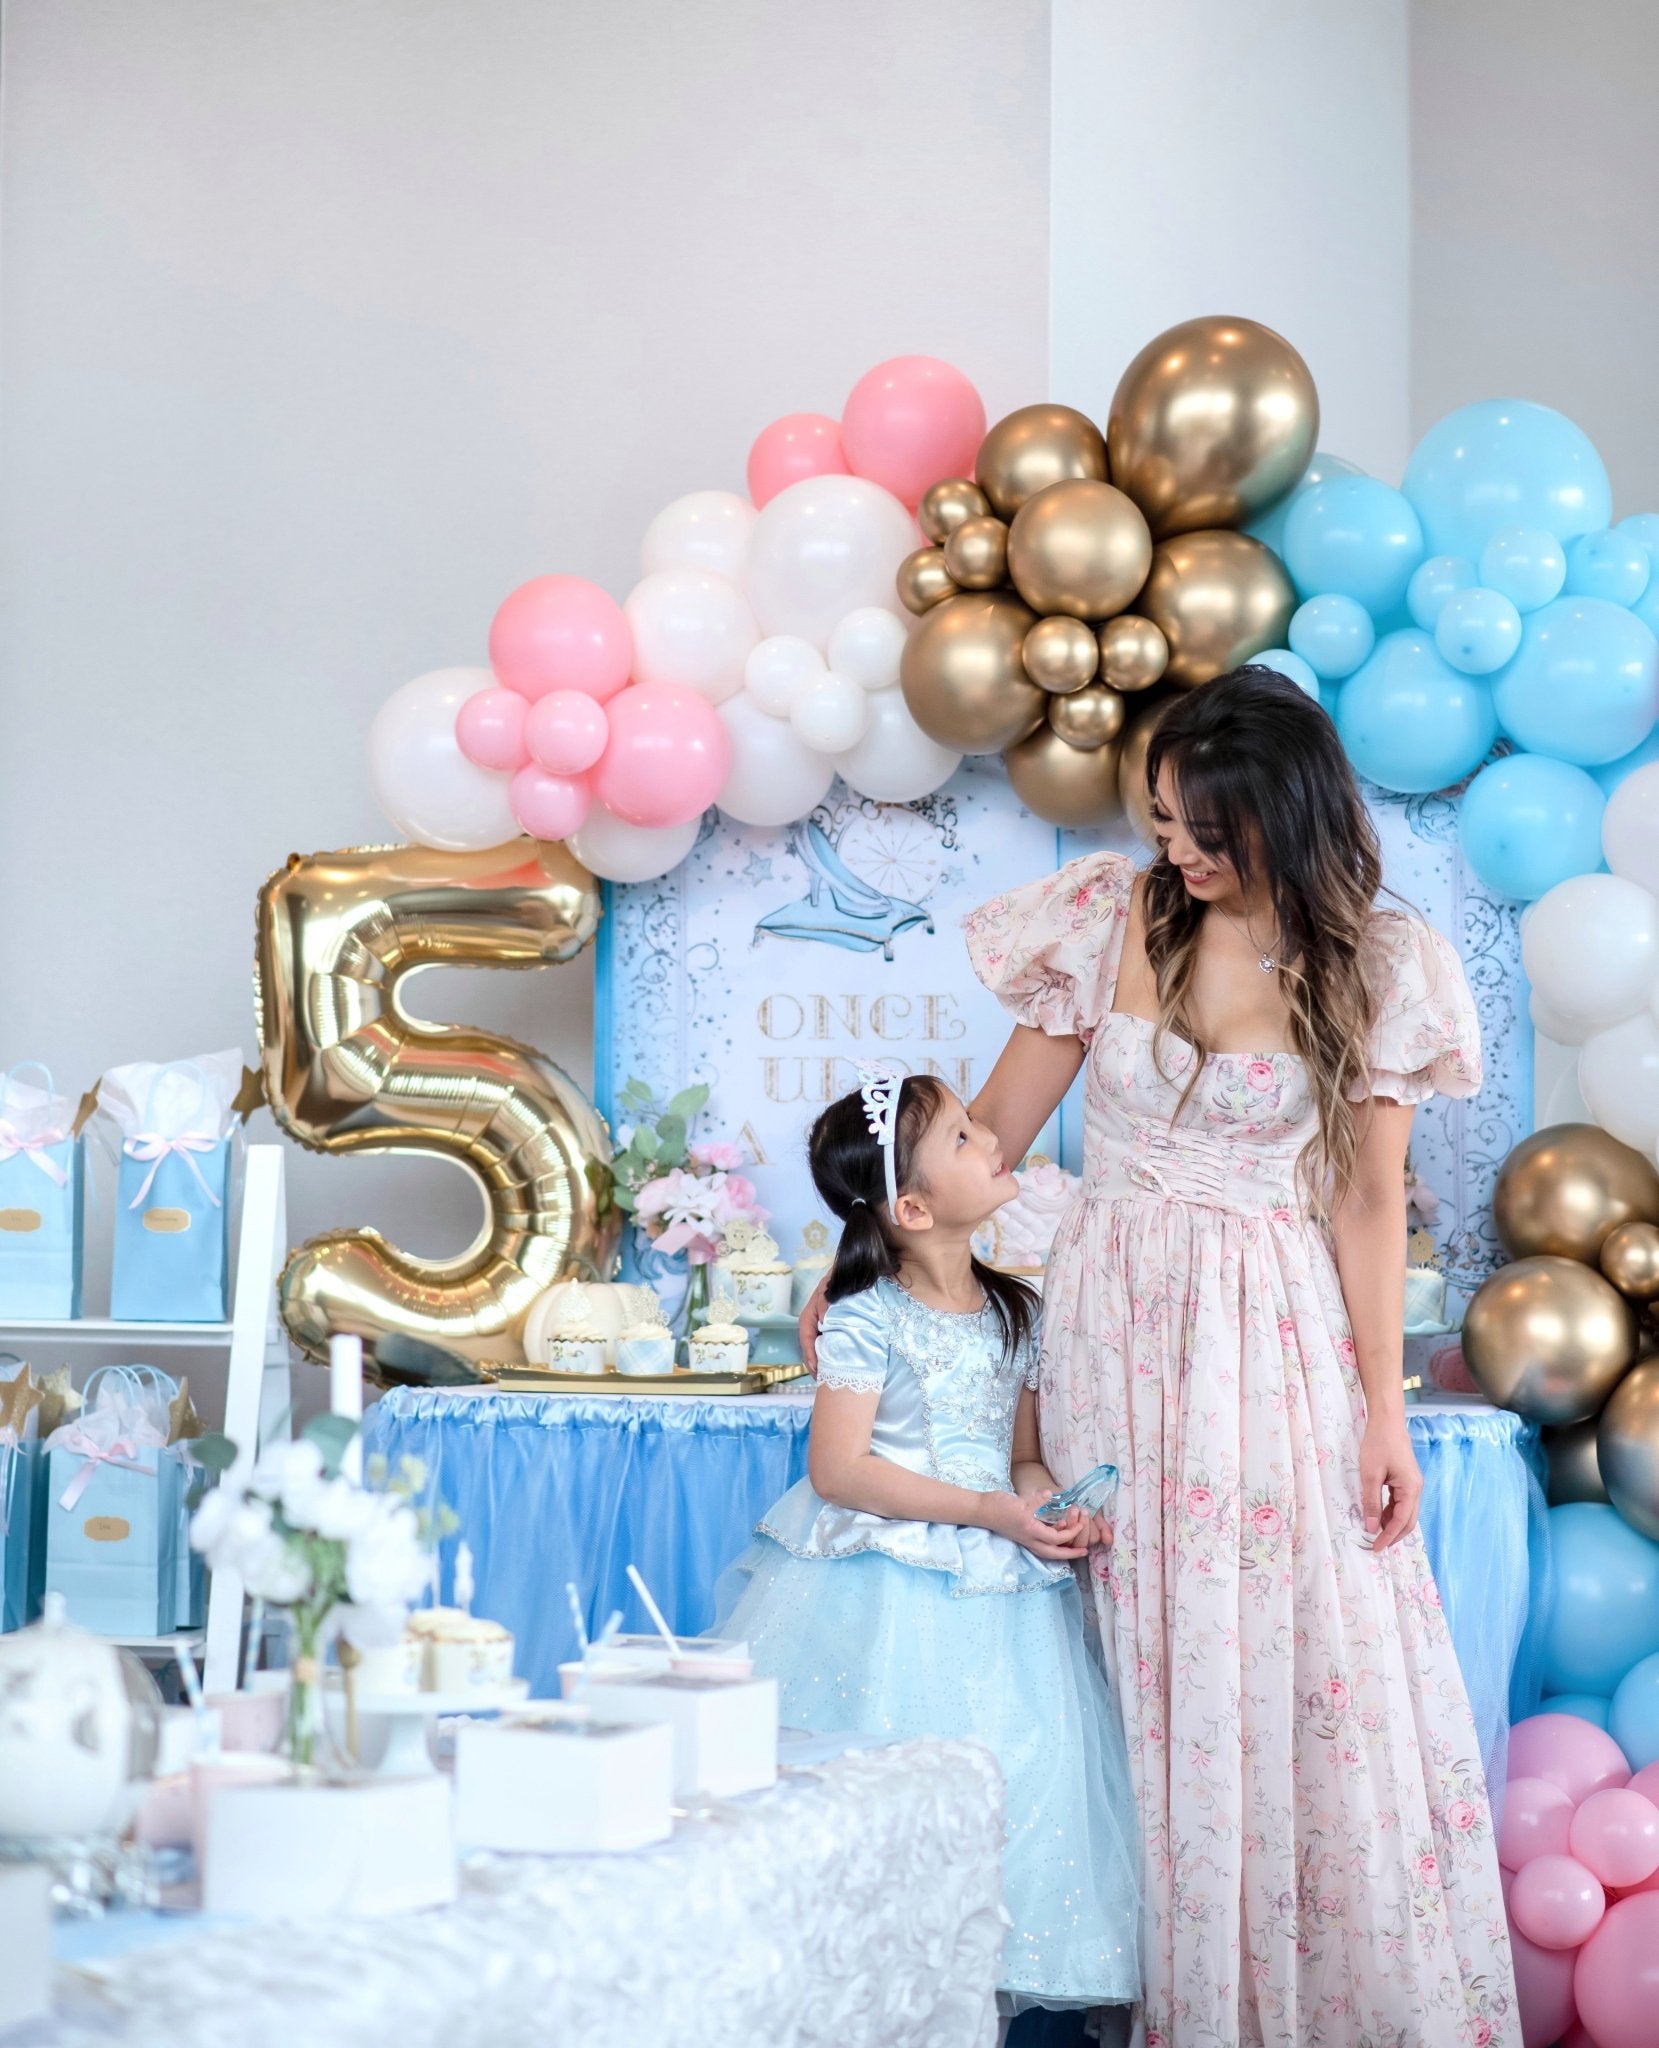 Top 5 Fifth Birthday Party Themes – Ellie's Party Supply